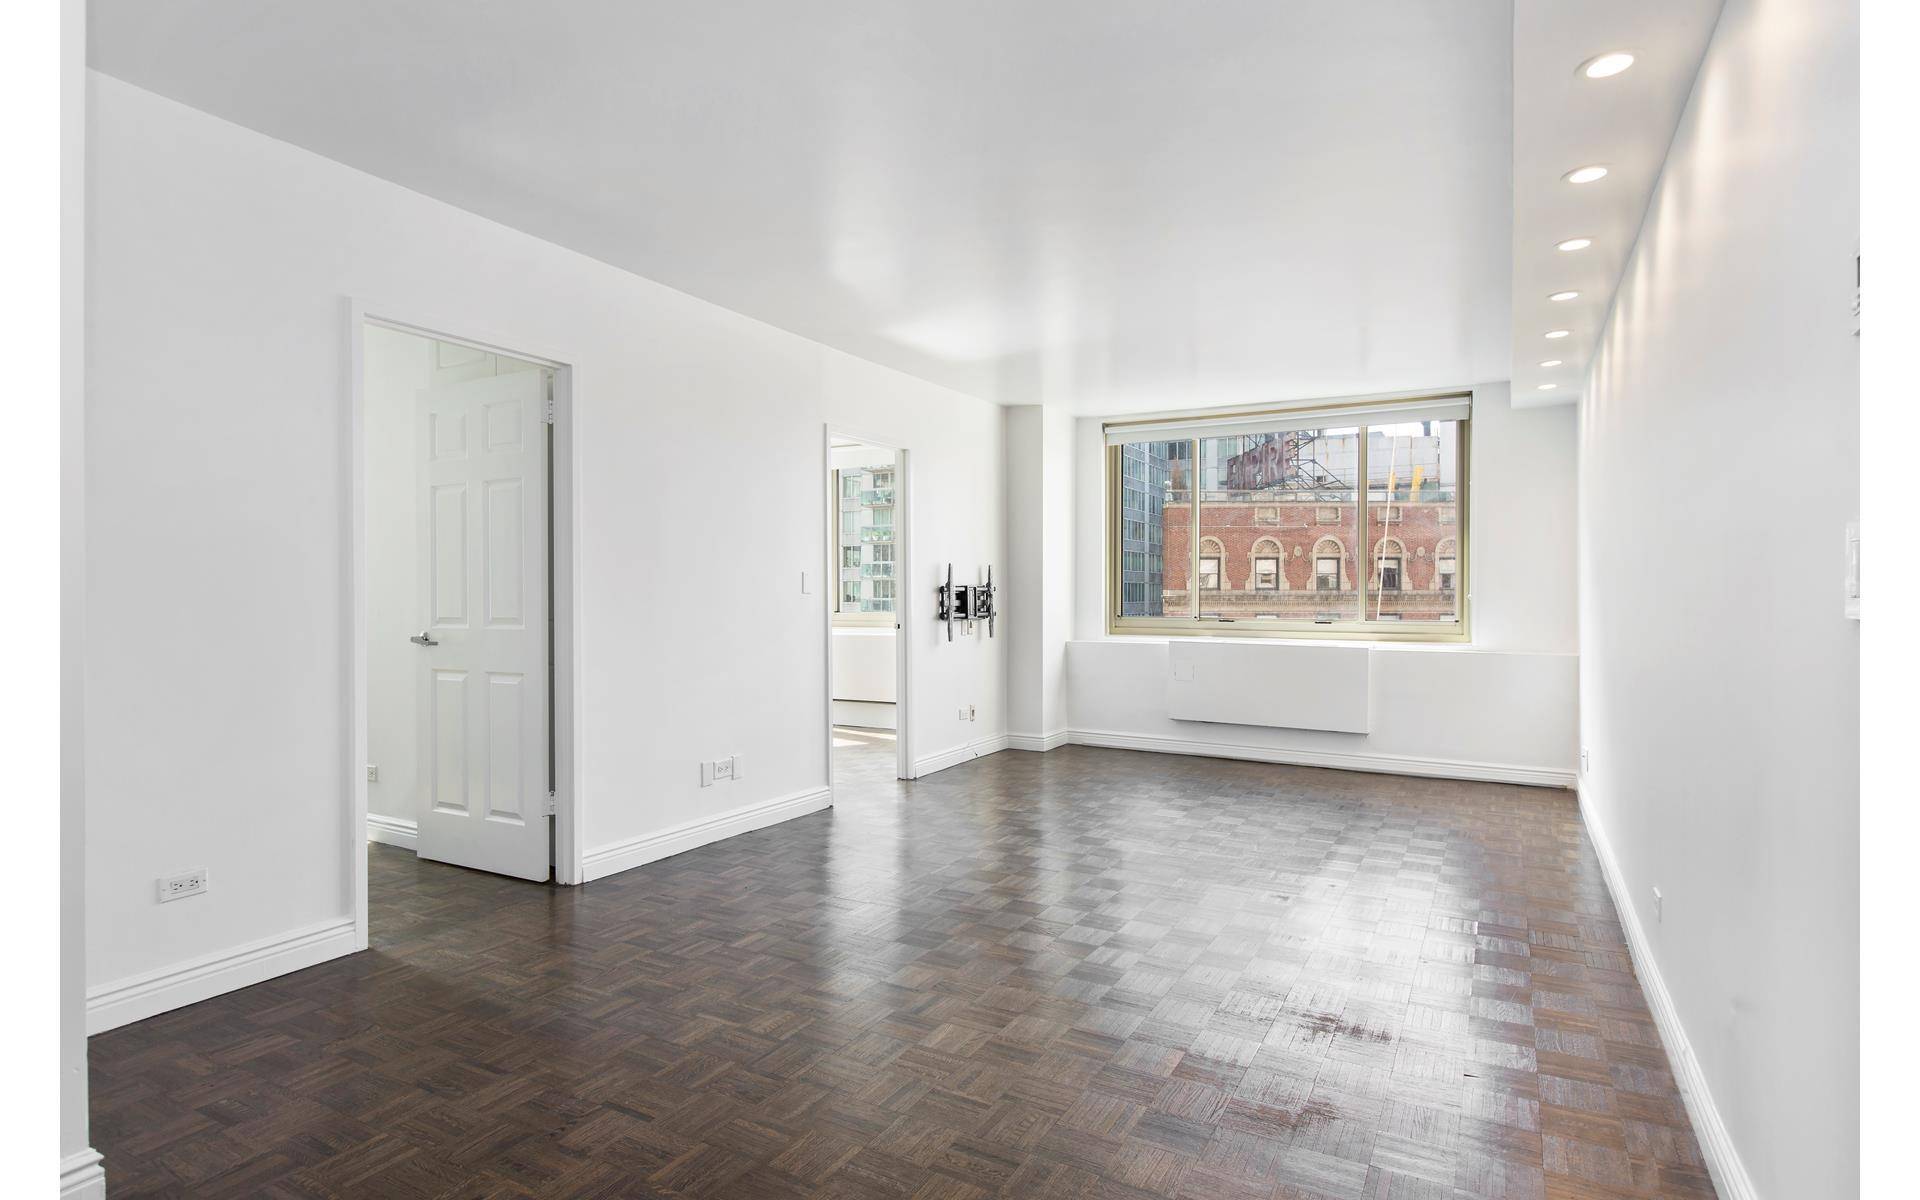 3 Bed, 2 Bath rental right next to Central Park in the Upper West Side's best New Condo Conversion.